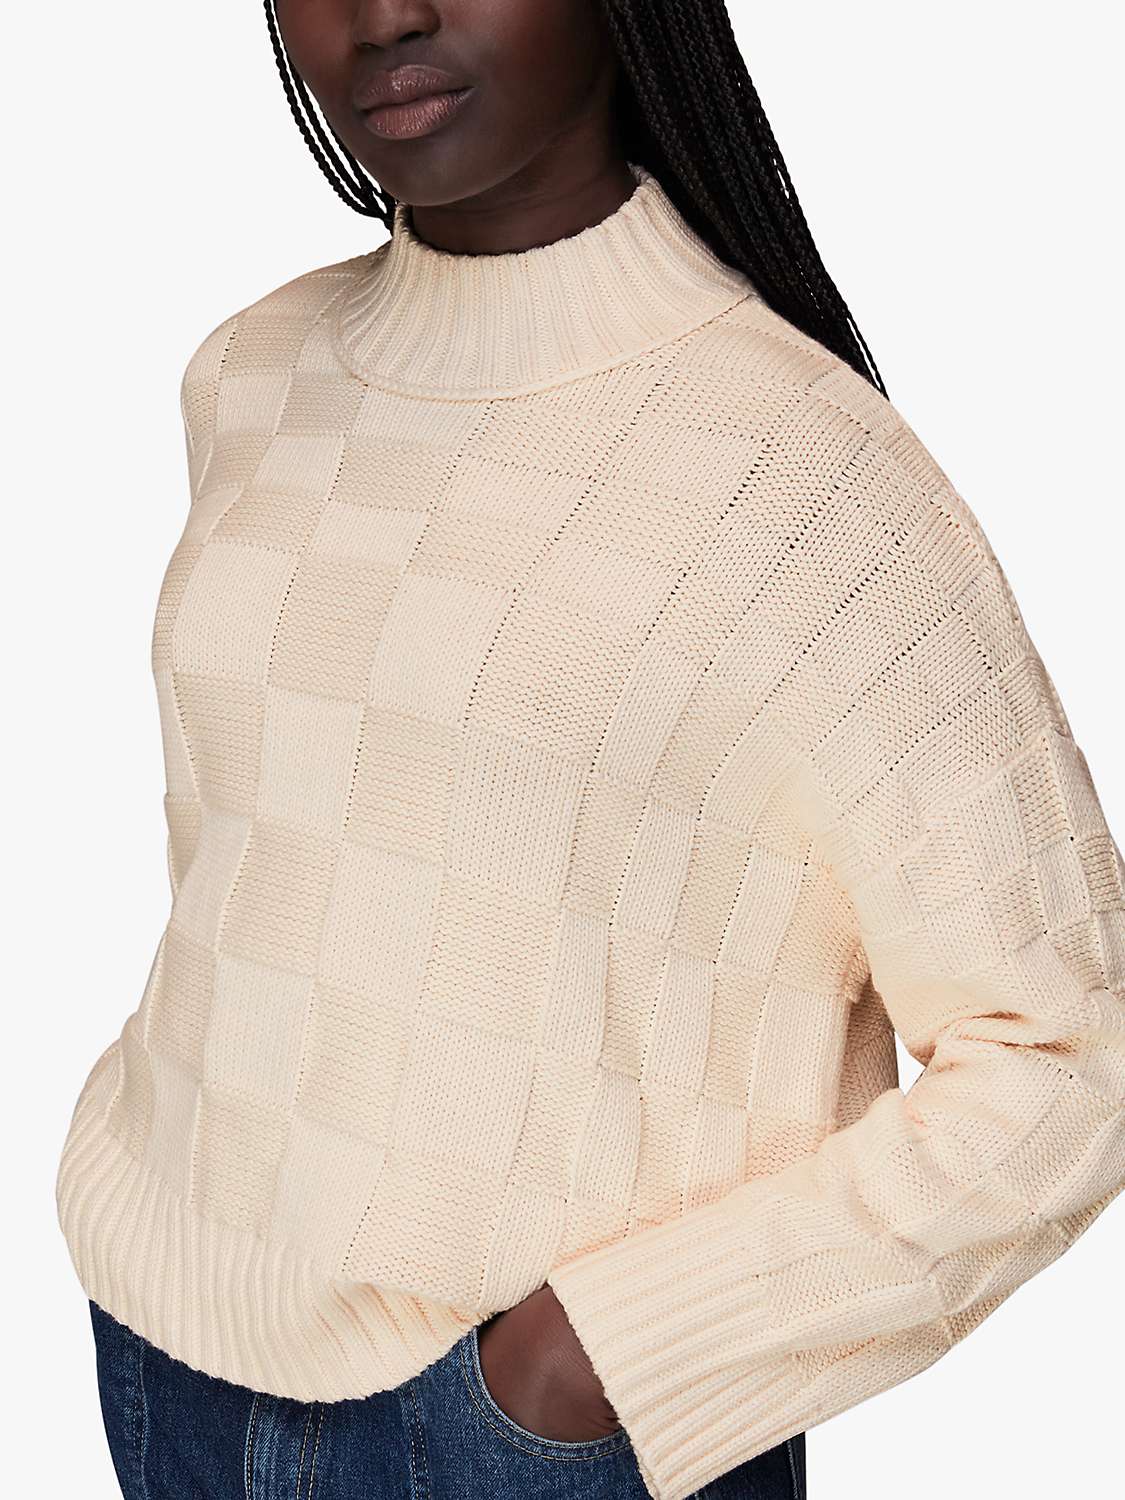 Buy Whistles Texture Check Knitted Cotton Jumper Online at johnlewis.com